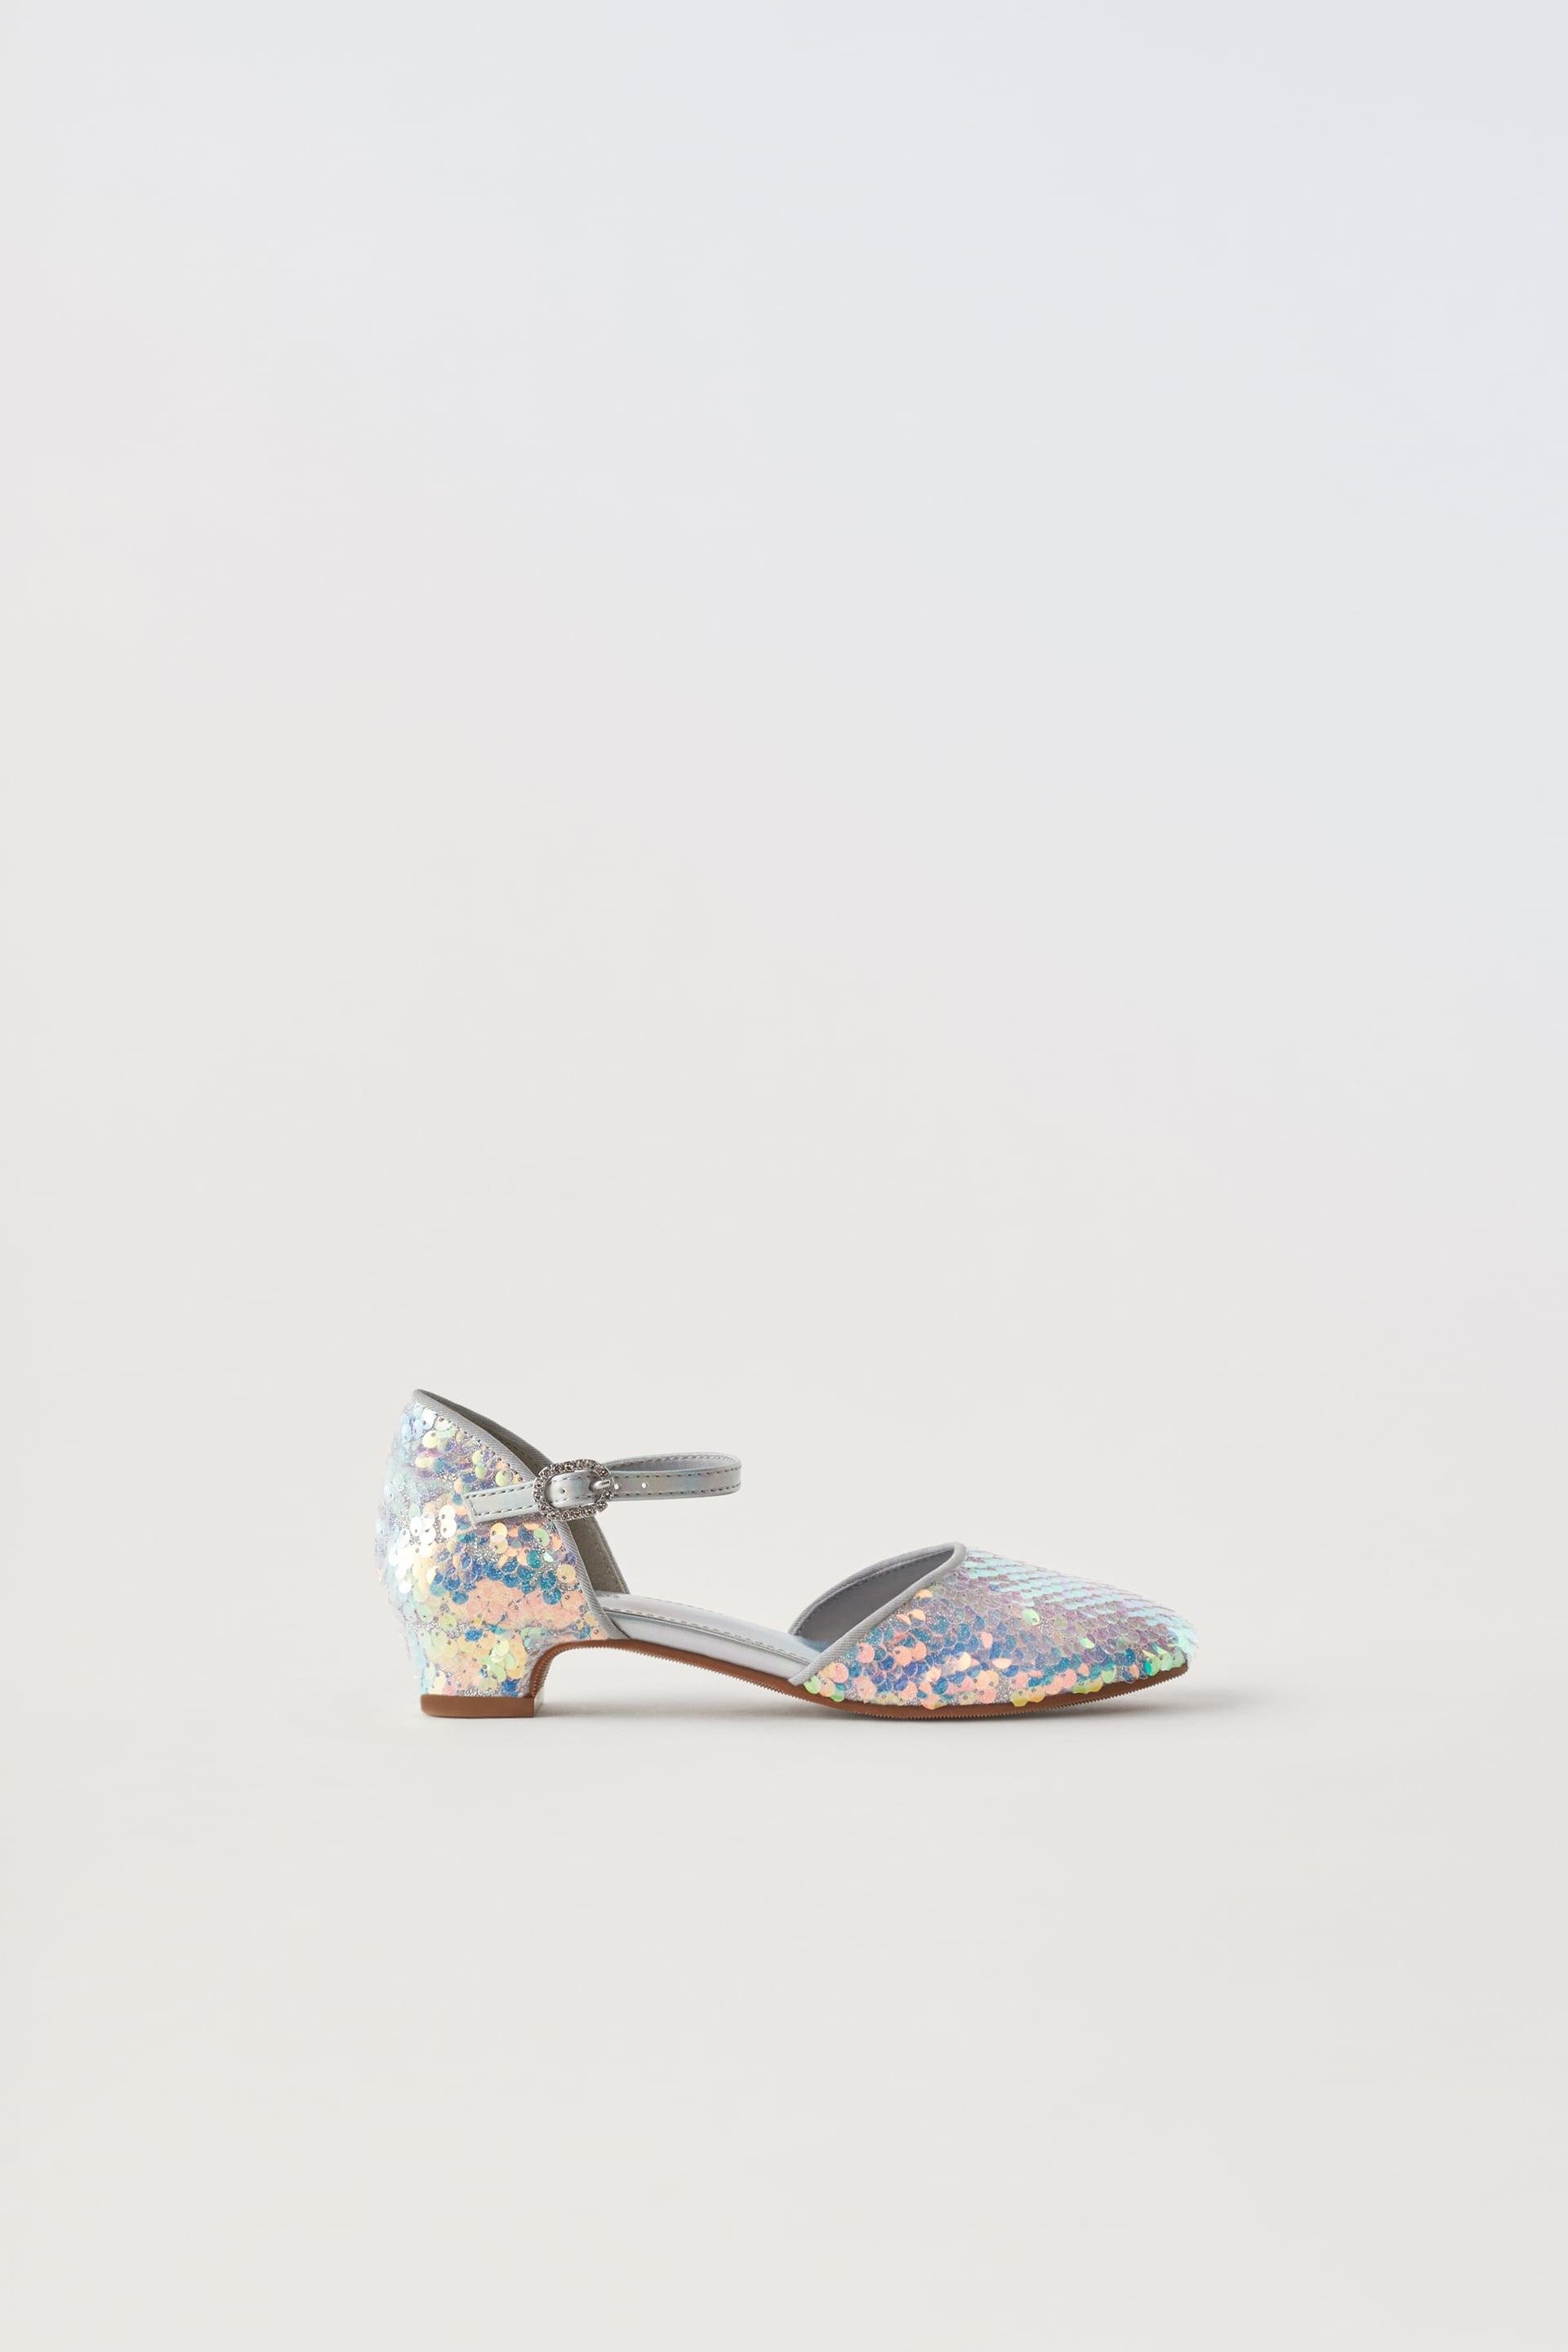 SEQUIN HEELED COSTUME SHOES by ZARA